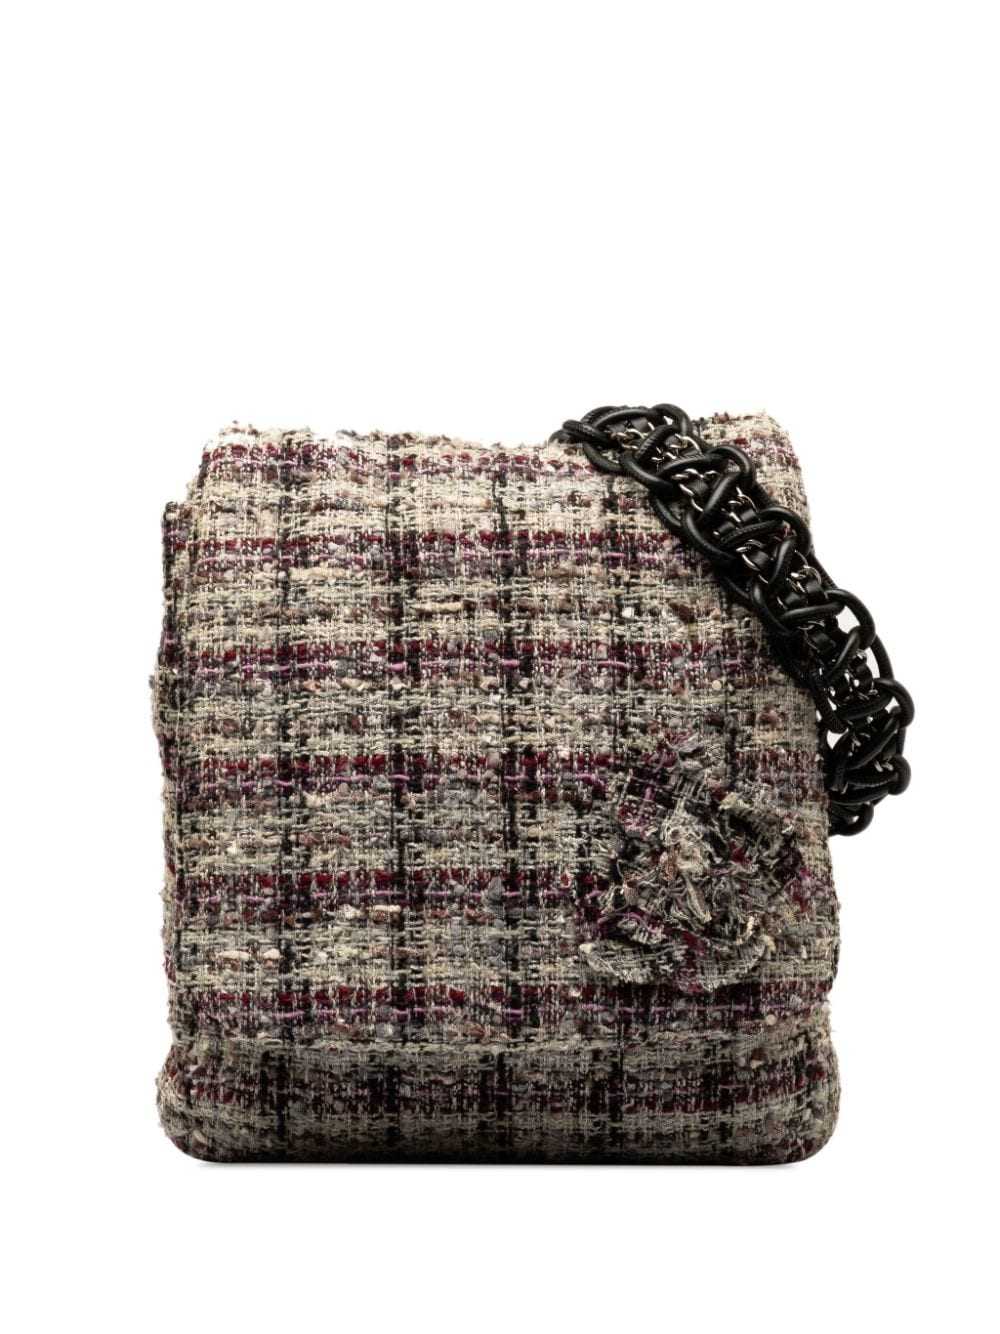 CHANEL Pre-Owned 2005-2006 Tweed Camellia crossbo… - image 1